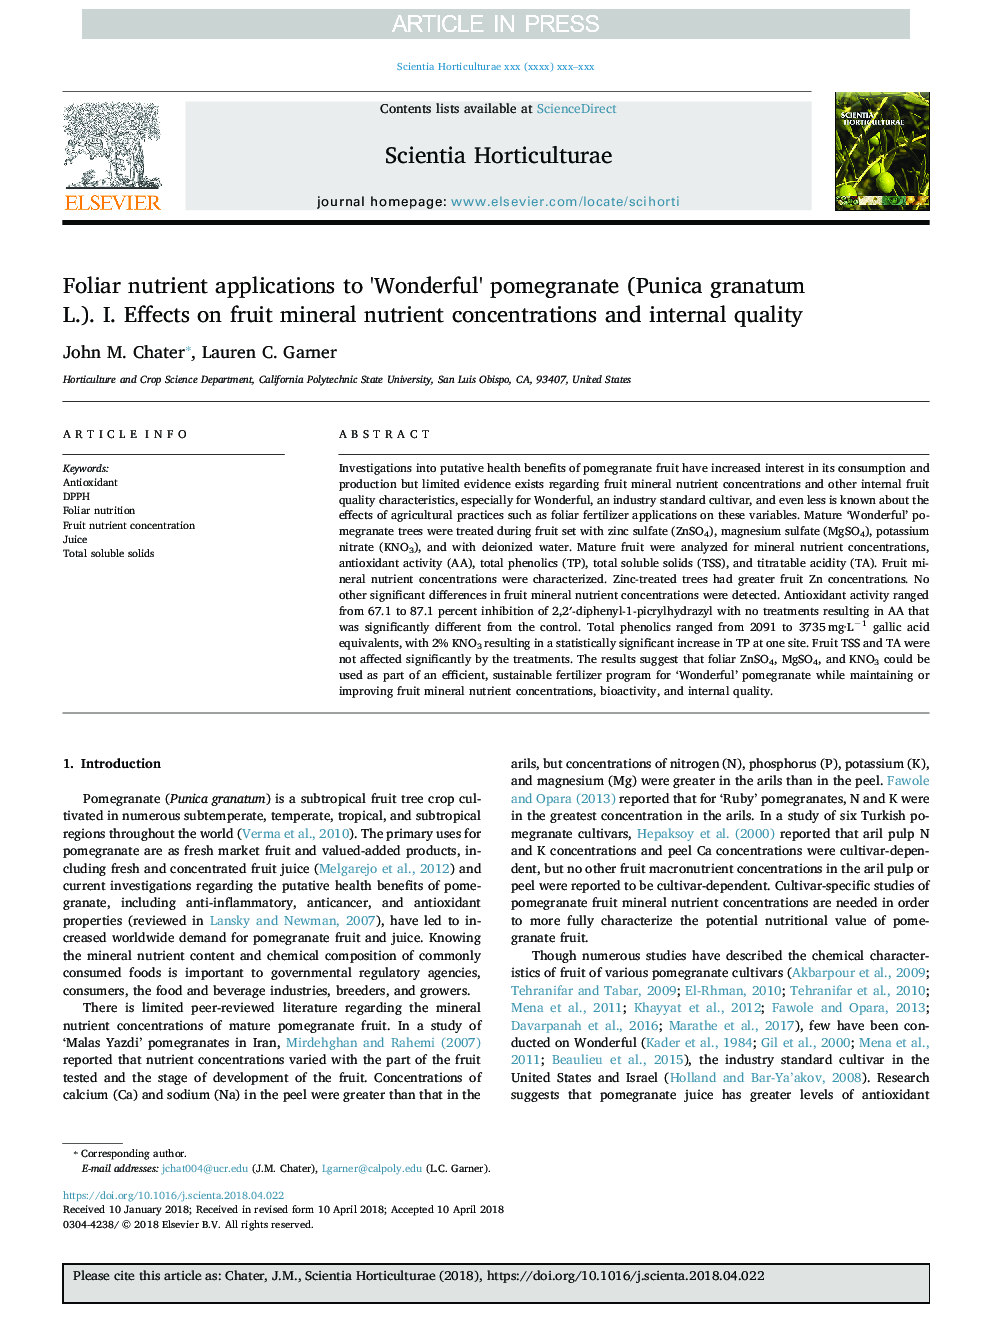 Foliar nutrient applications to 'Wonderful' pomegranate (Punica granatum L.). I. Effects on fruit mineral nutrient concentrations and internal quality